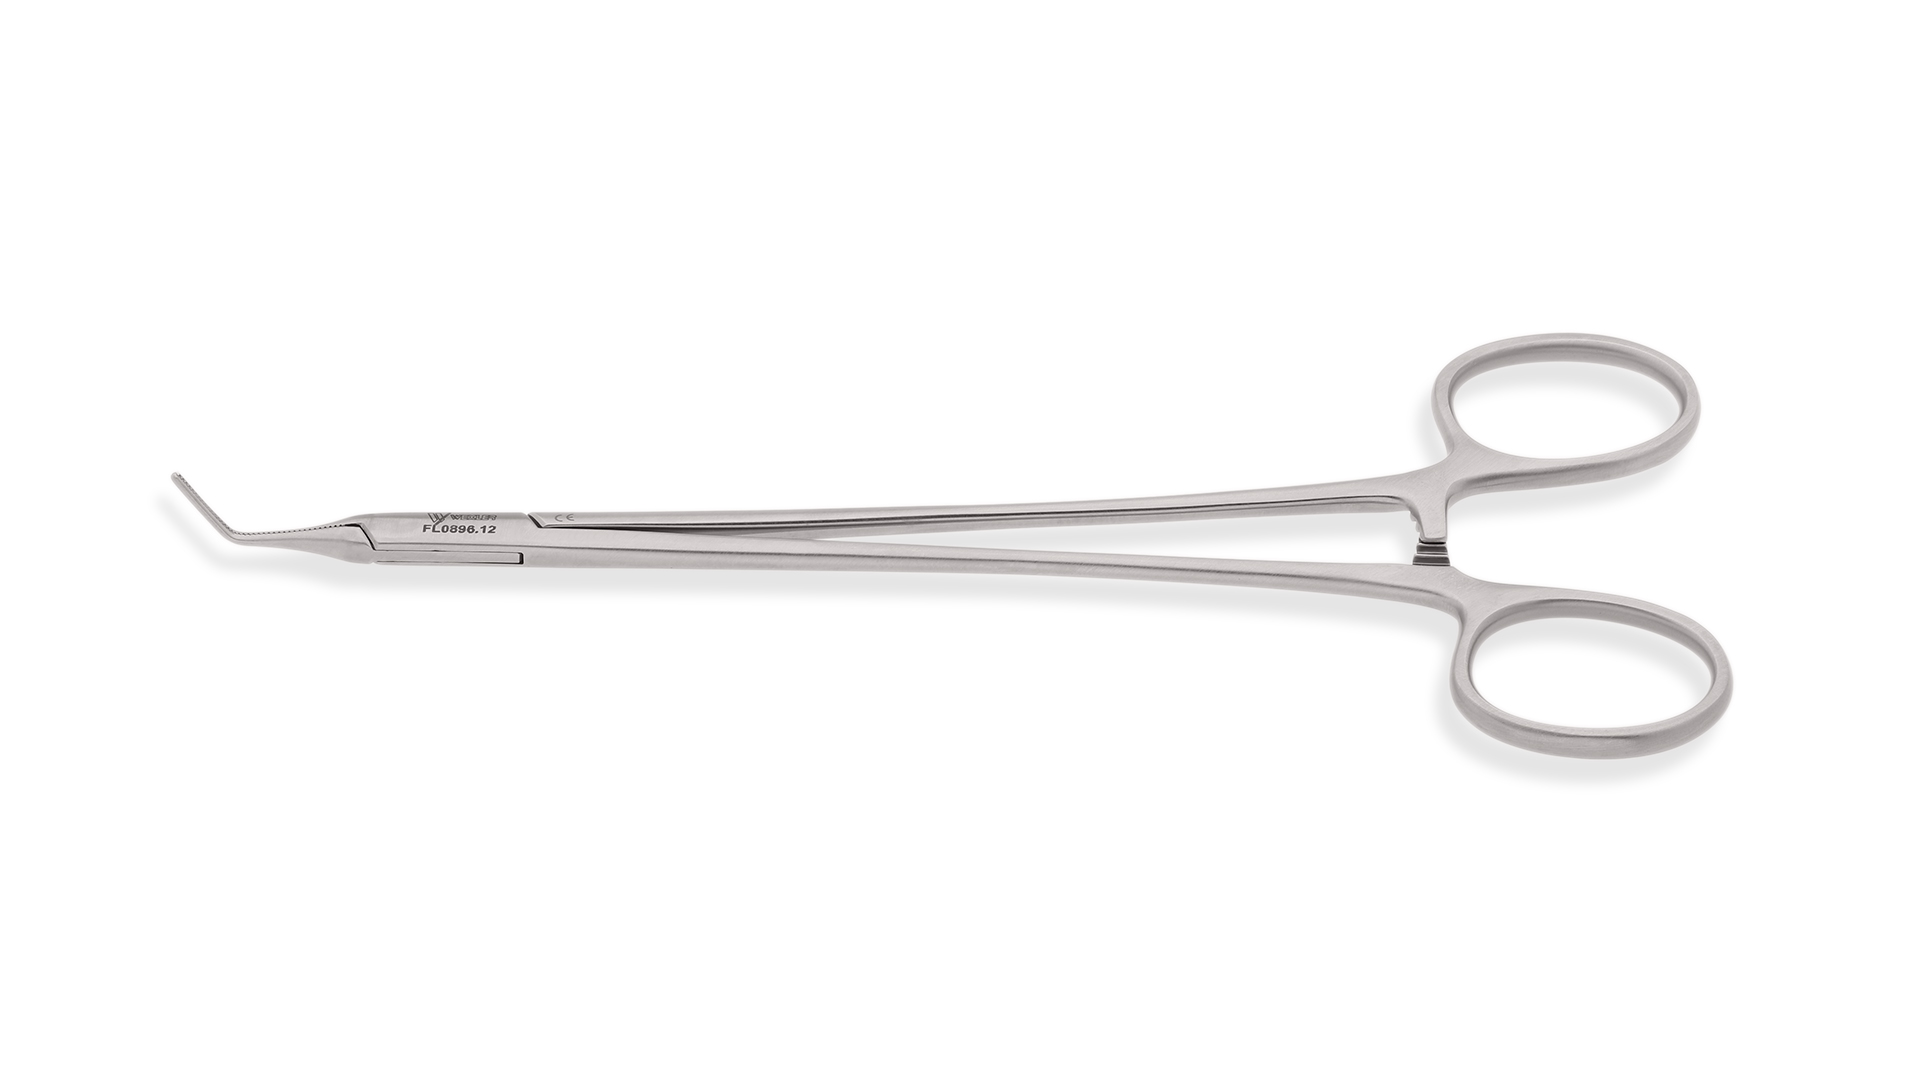 Bailey Forceps, Stainless Steel, Surgical Instruments